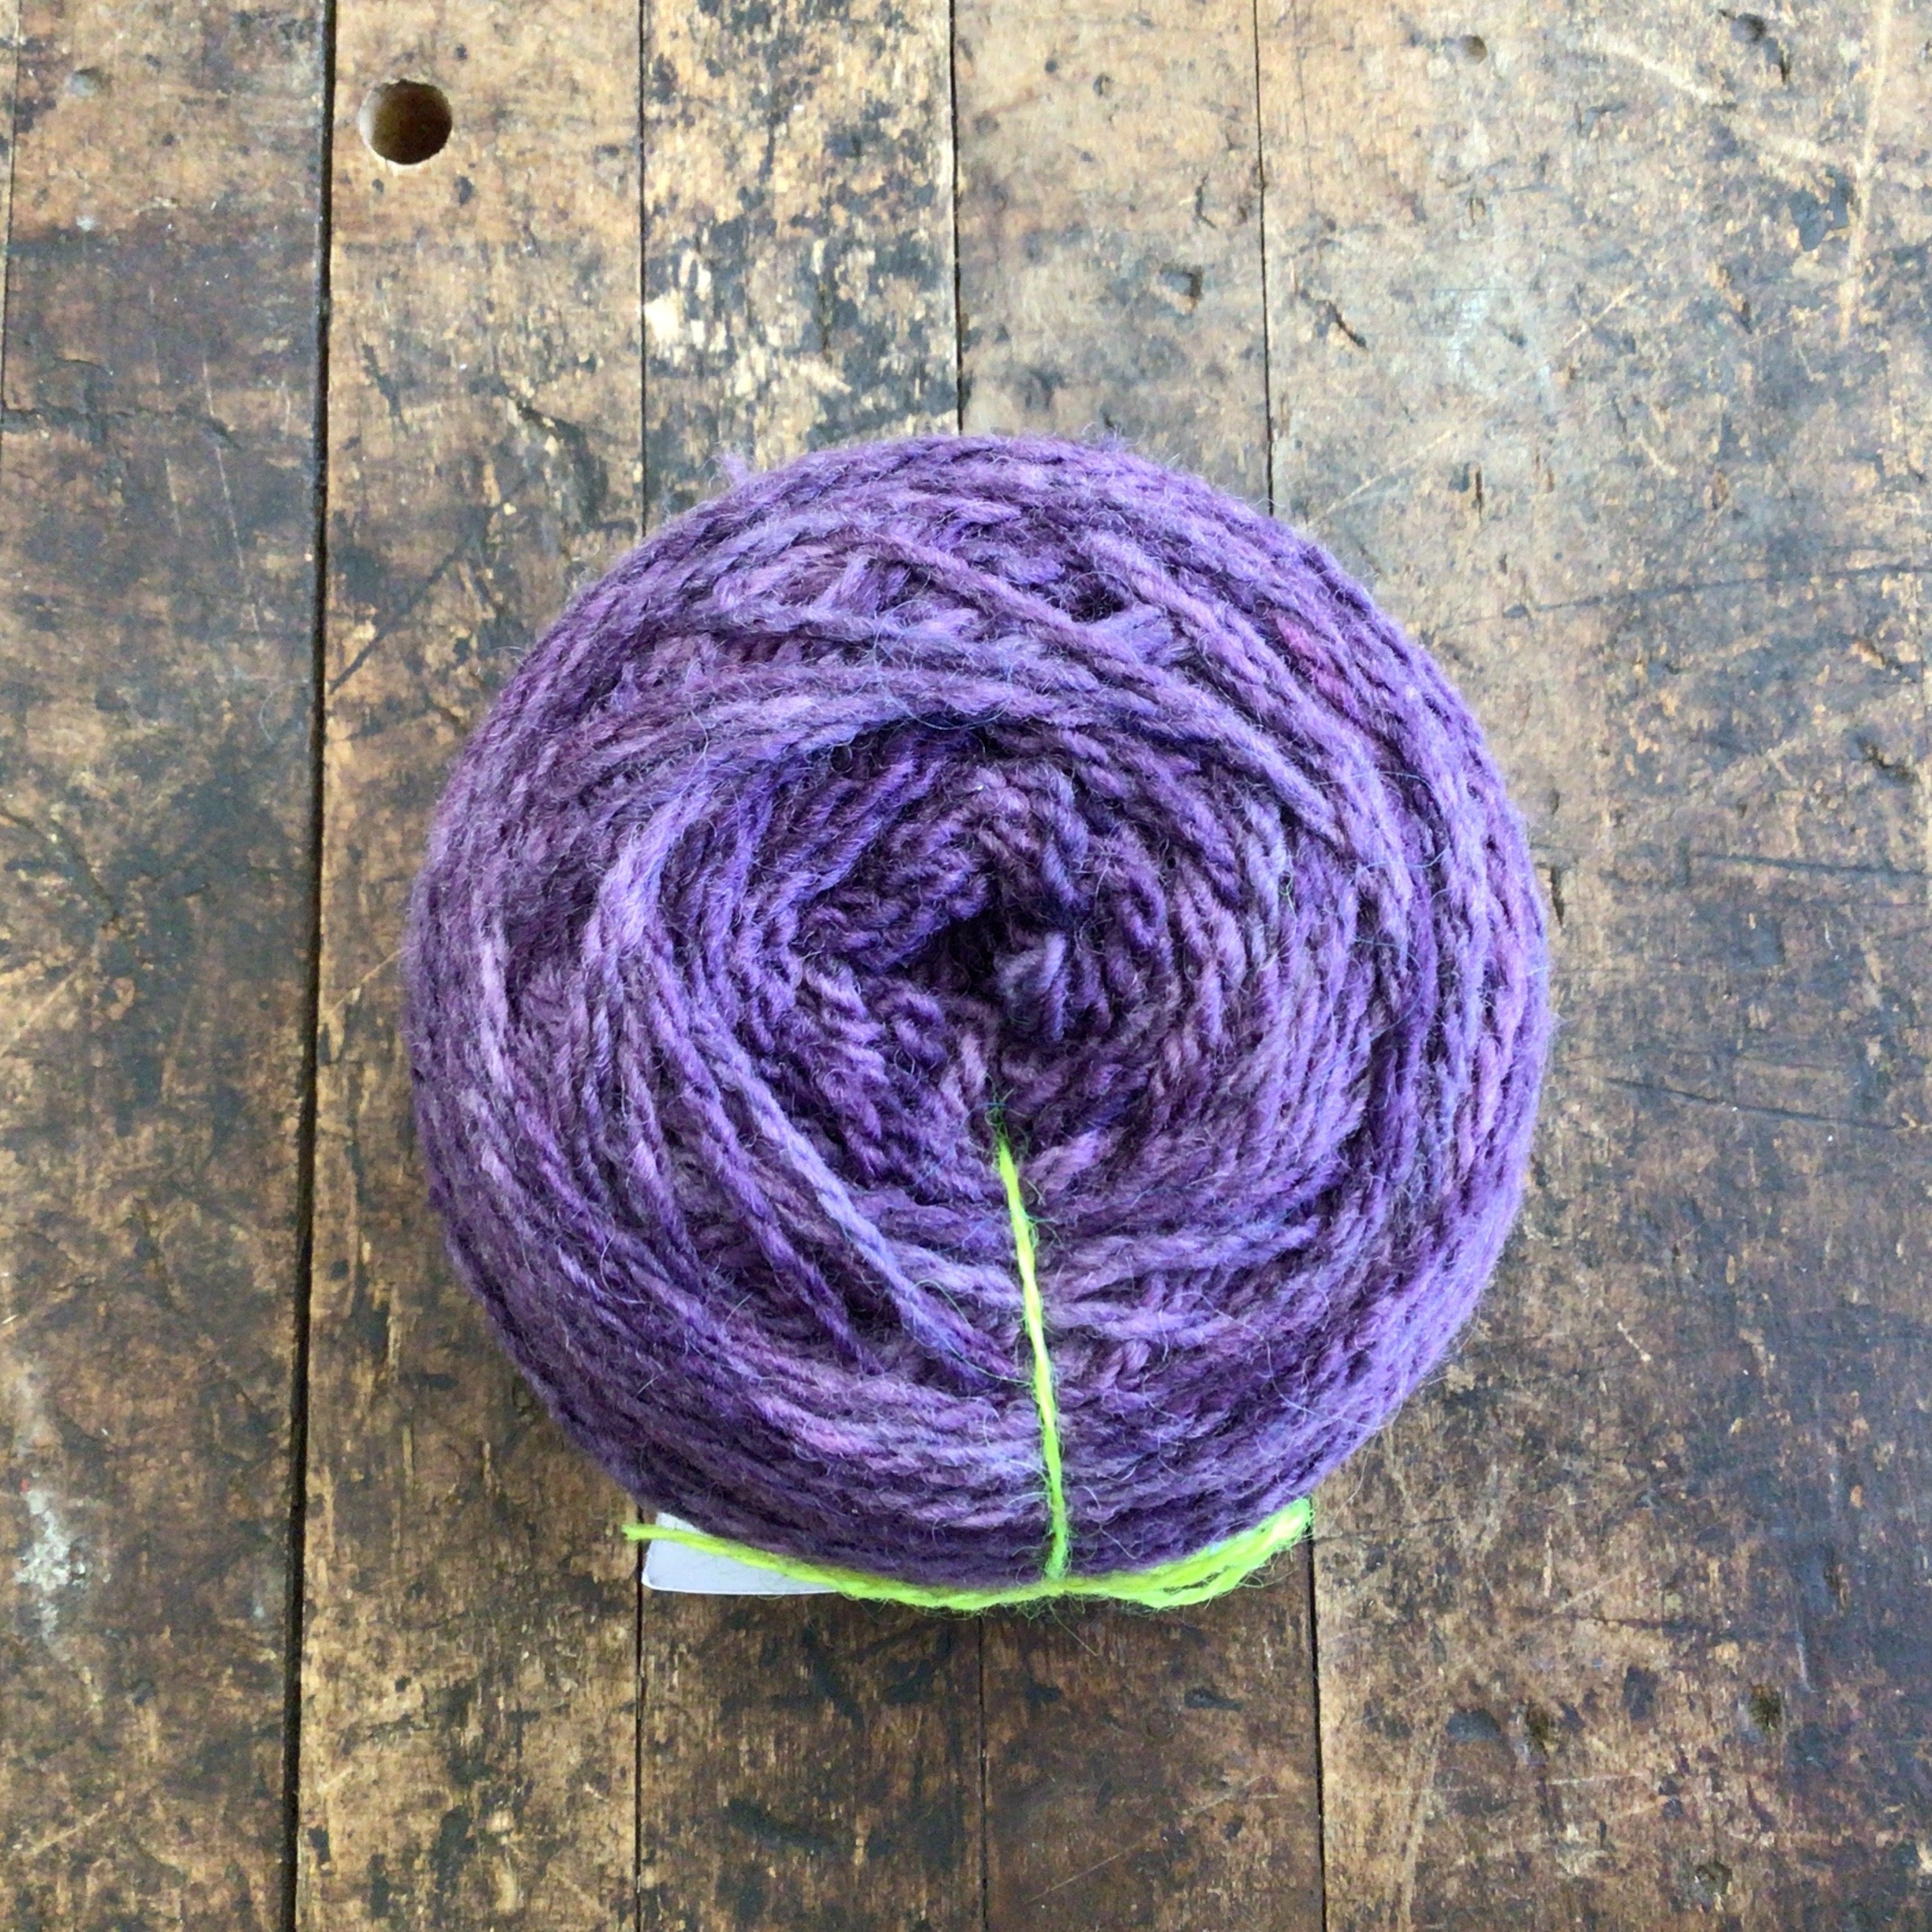 Tronstad Ranch Rambouillet 2 Ply Worsted Weight Yarn-Eggplant